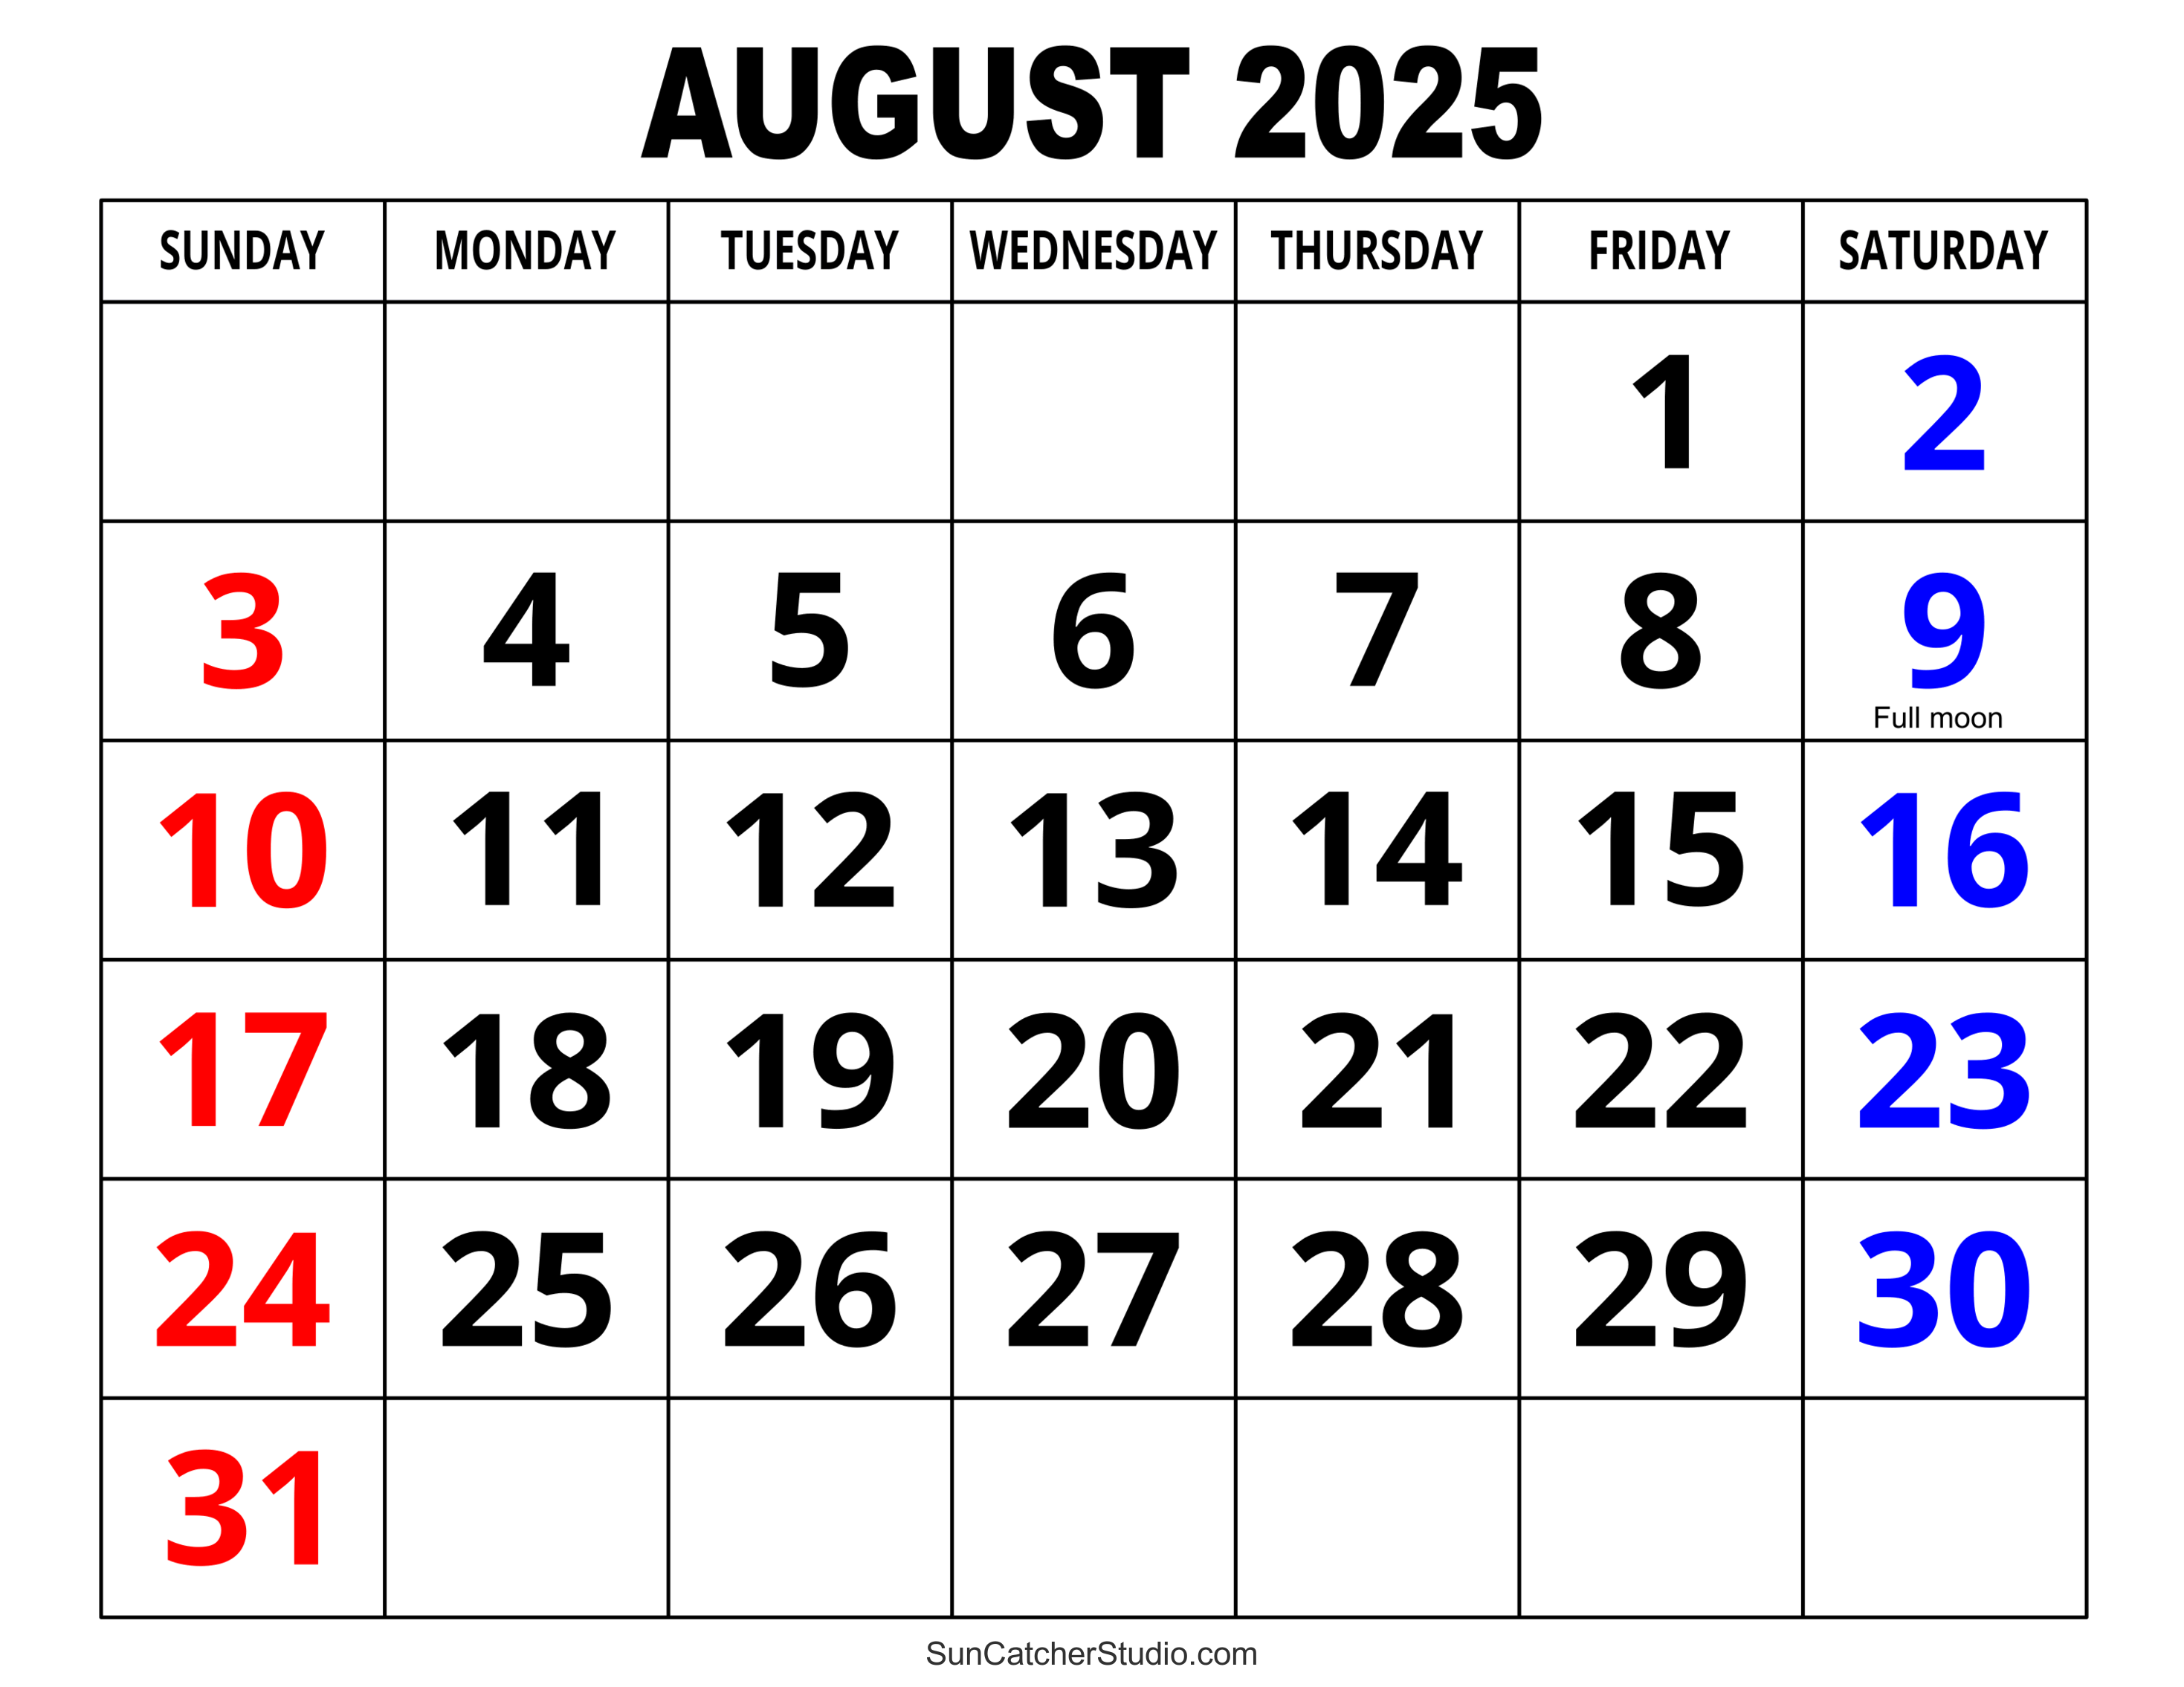 August 2025 Calendar (Free Printable) DIY Projects, Patterns